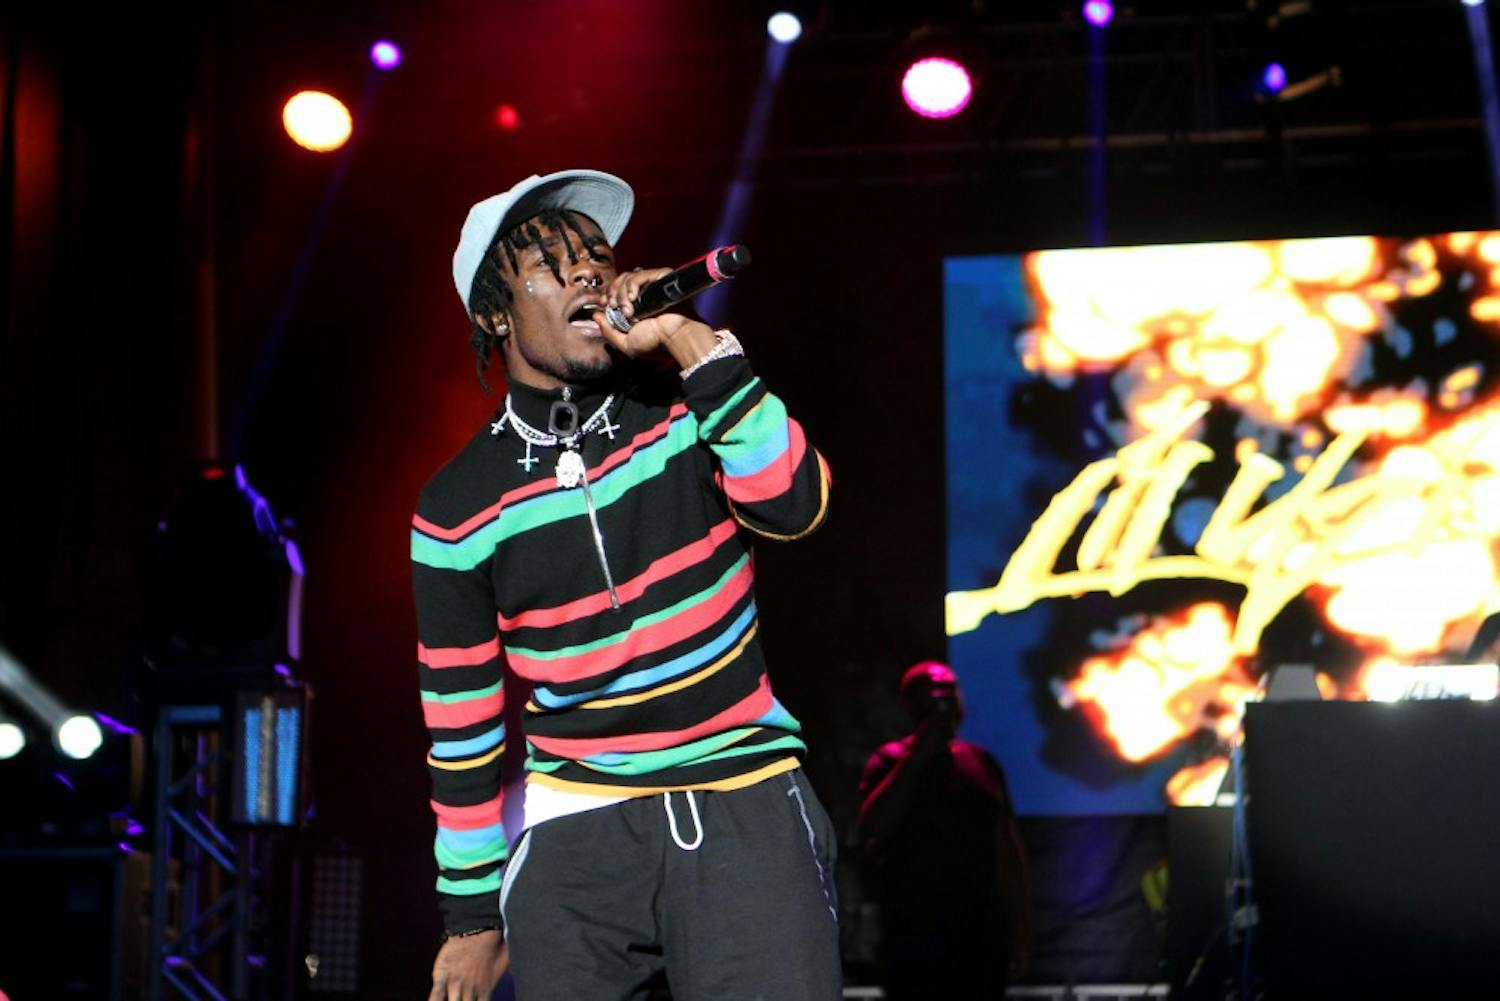 Lil Uzi Vert, one of four headliners at this year's UB Fall Fest started a rager&nbsp;at Baird Point with songs like "XO TOUR Llif3" and "444+222." SA hosted the outdoor&nbsp;fest, which fused rock with rap.